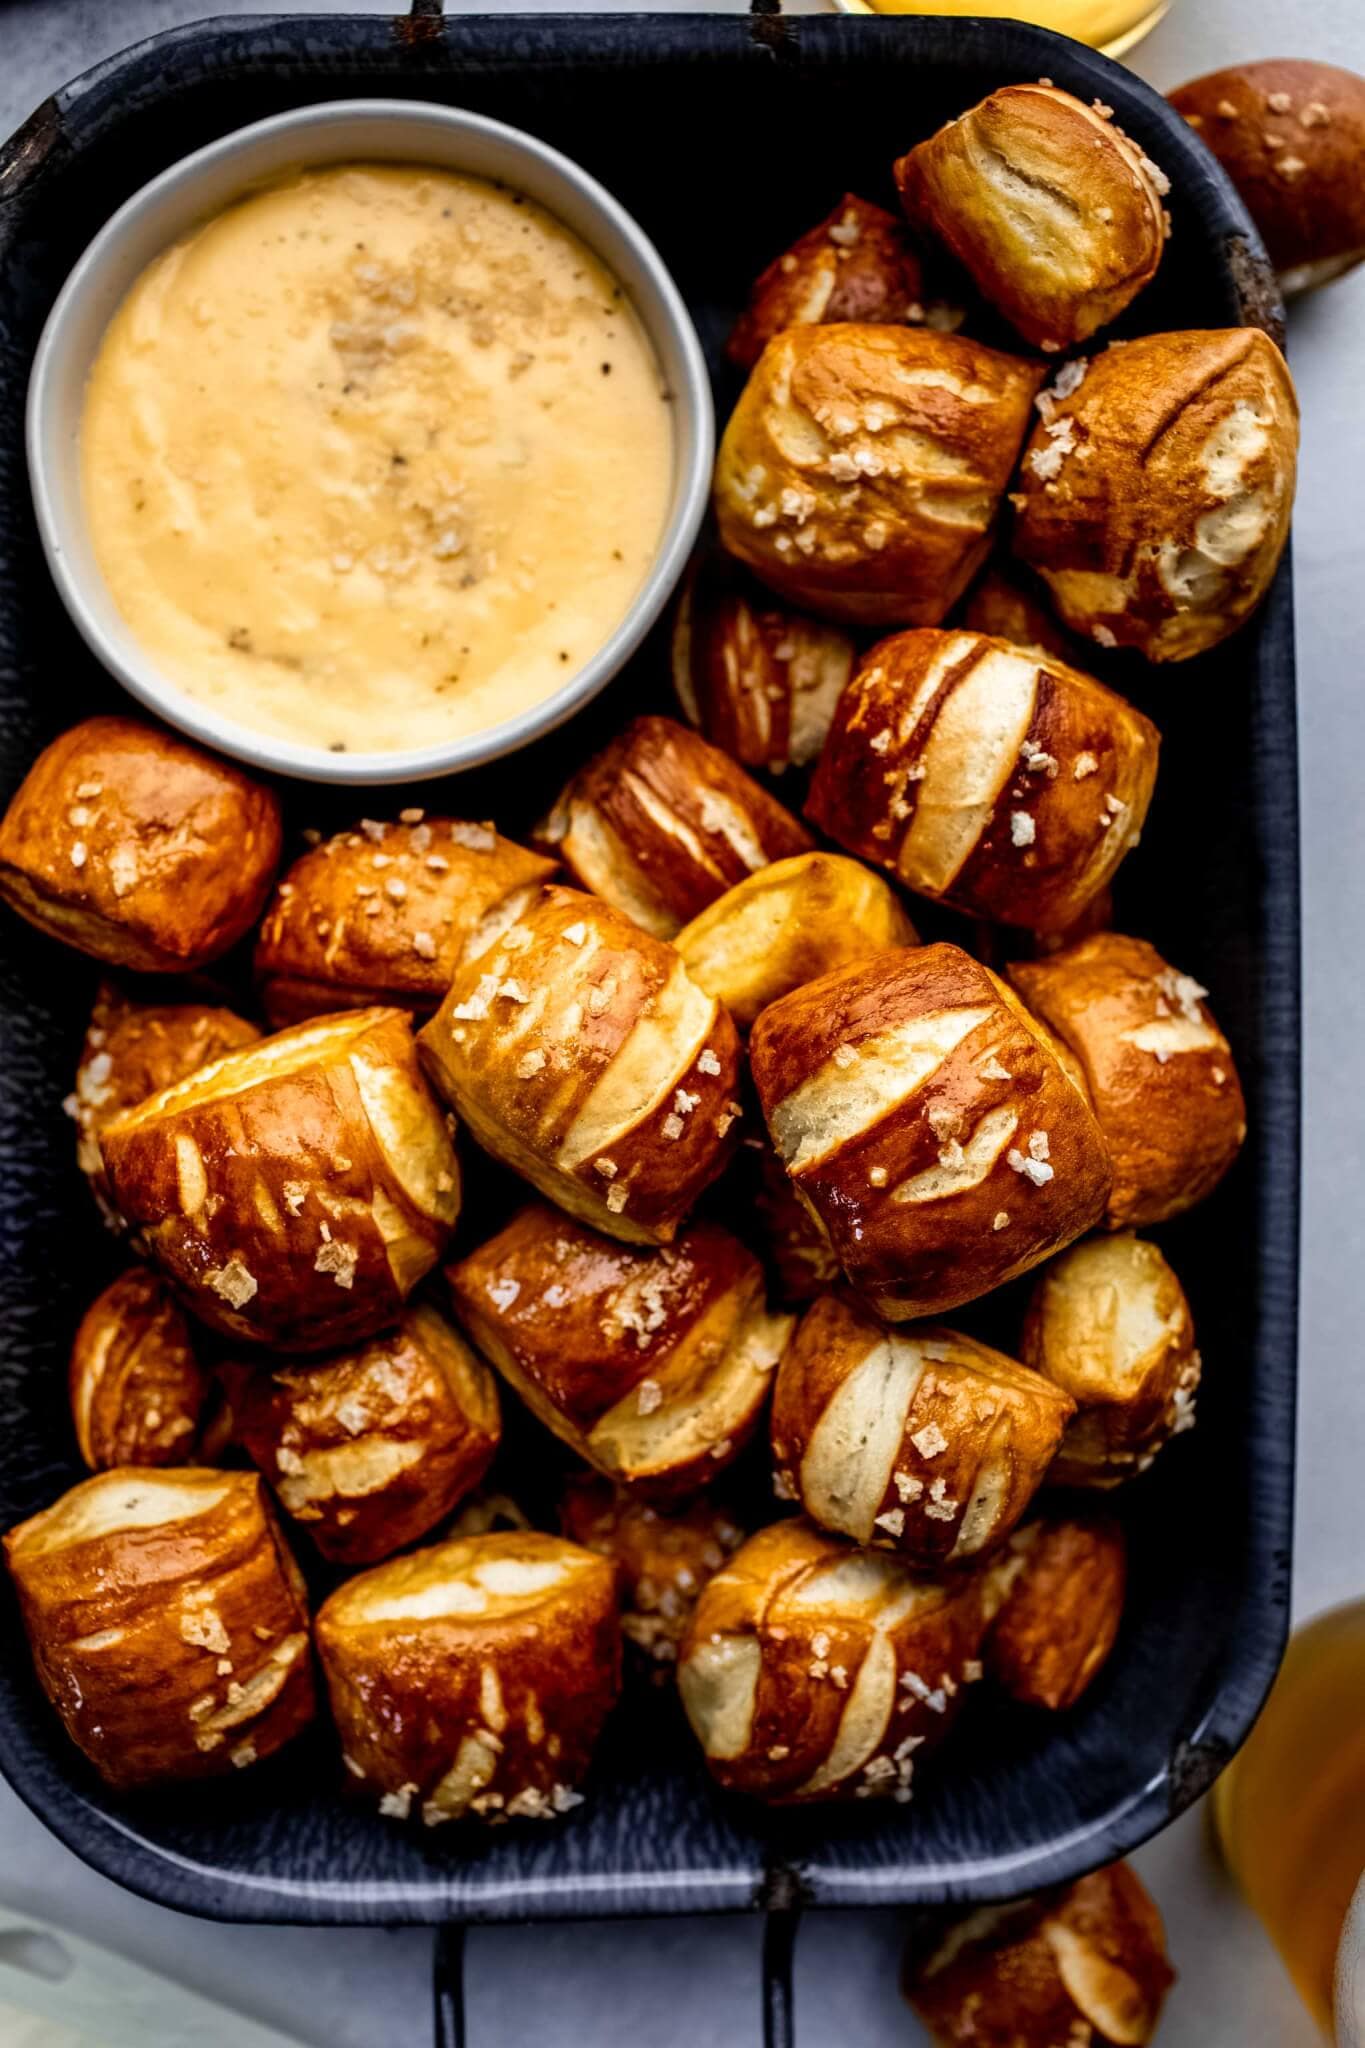 Overhead shot of pretzel bites in serving platter with small bowl of cheese sauce.